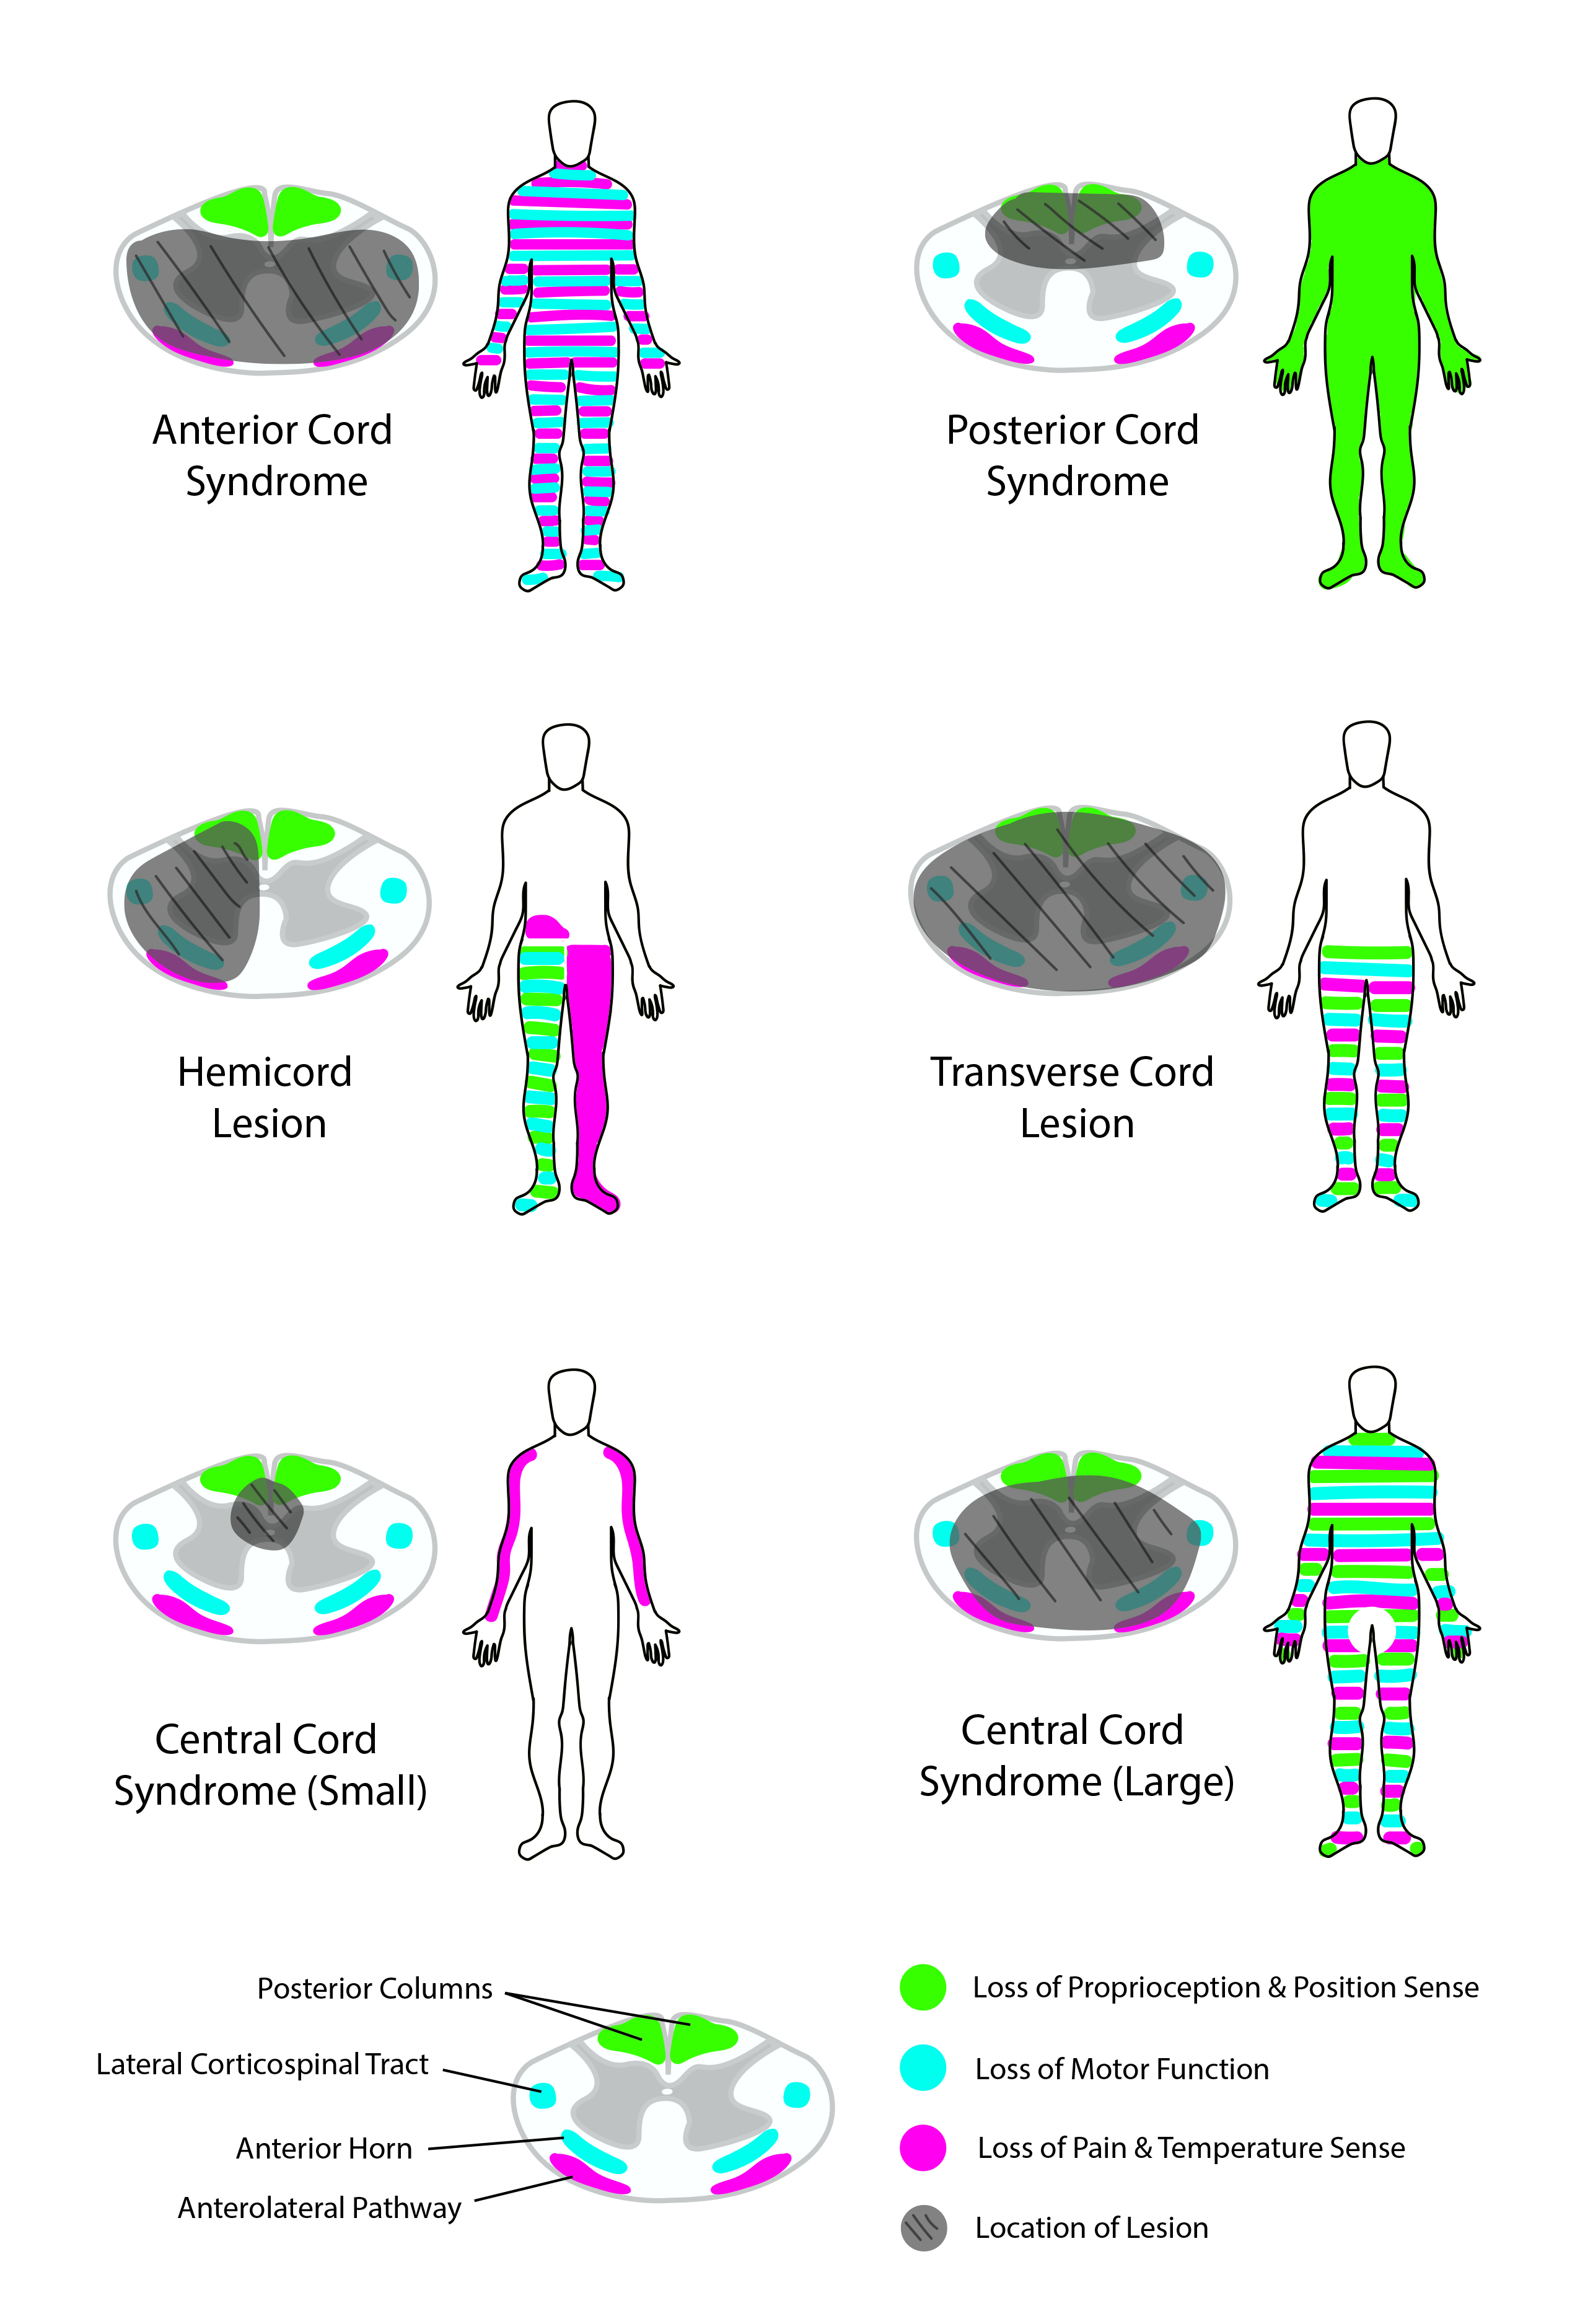 Comparison of spinal cord lesions and syndromes with corresponding sensory/motor deficits.